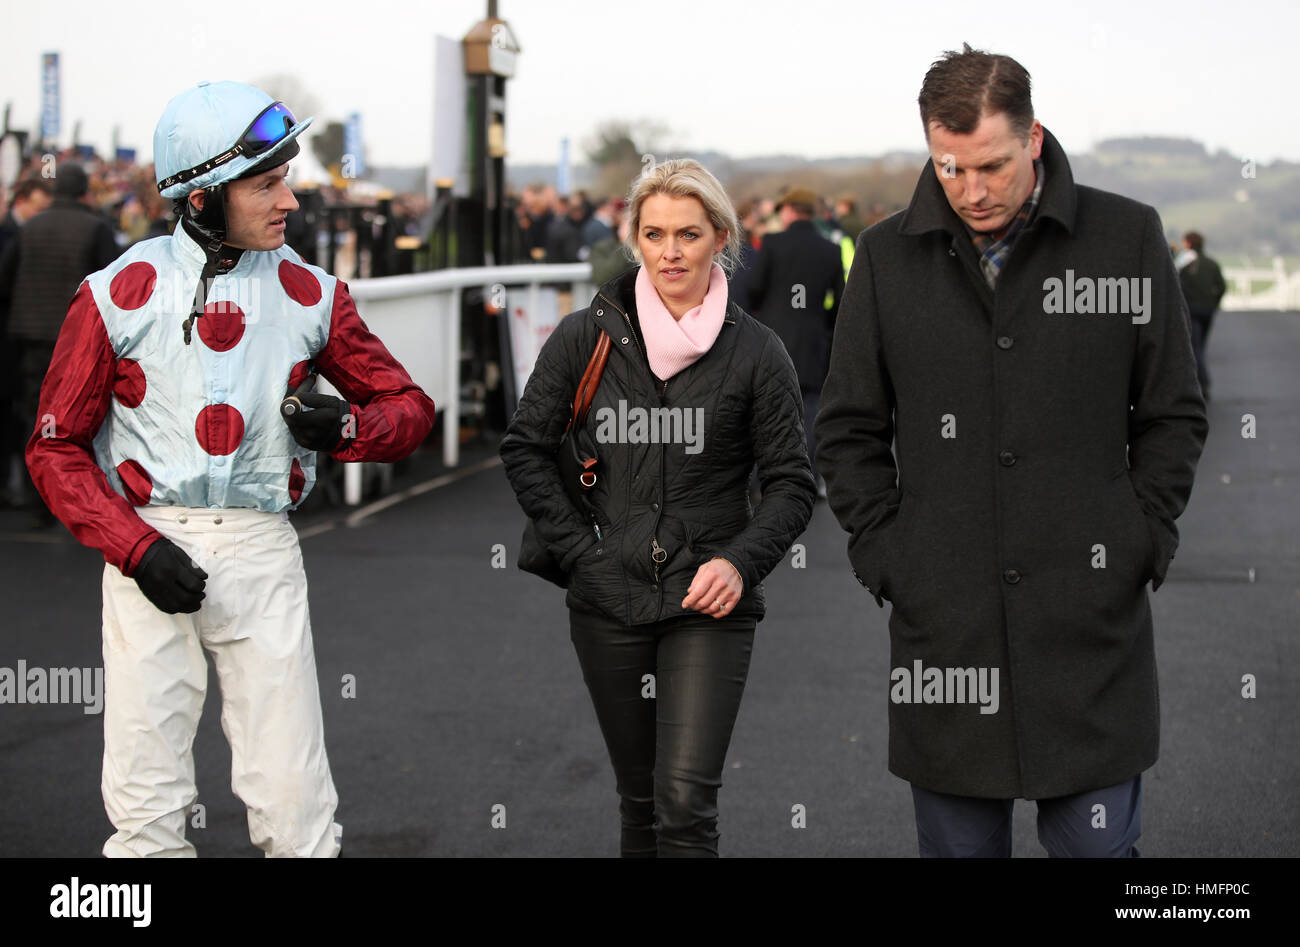 Jockey Adam Wedge with horse Racing agent Gearoid Costelloe (right) and partner of trainer Rebecca Curtis (centre) at Chepstow Racecourse. Stock Photo